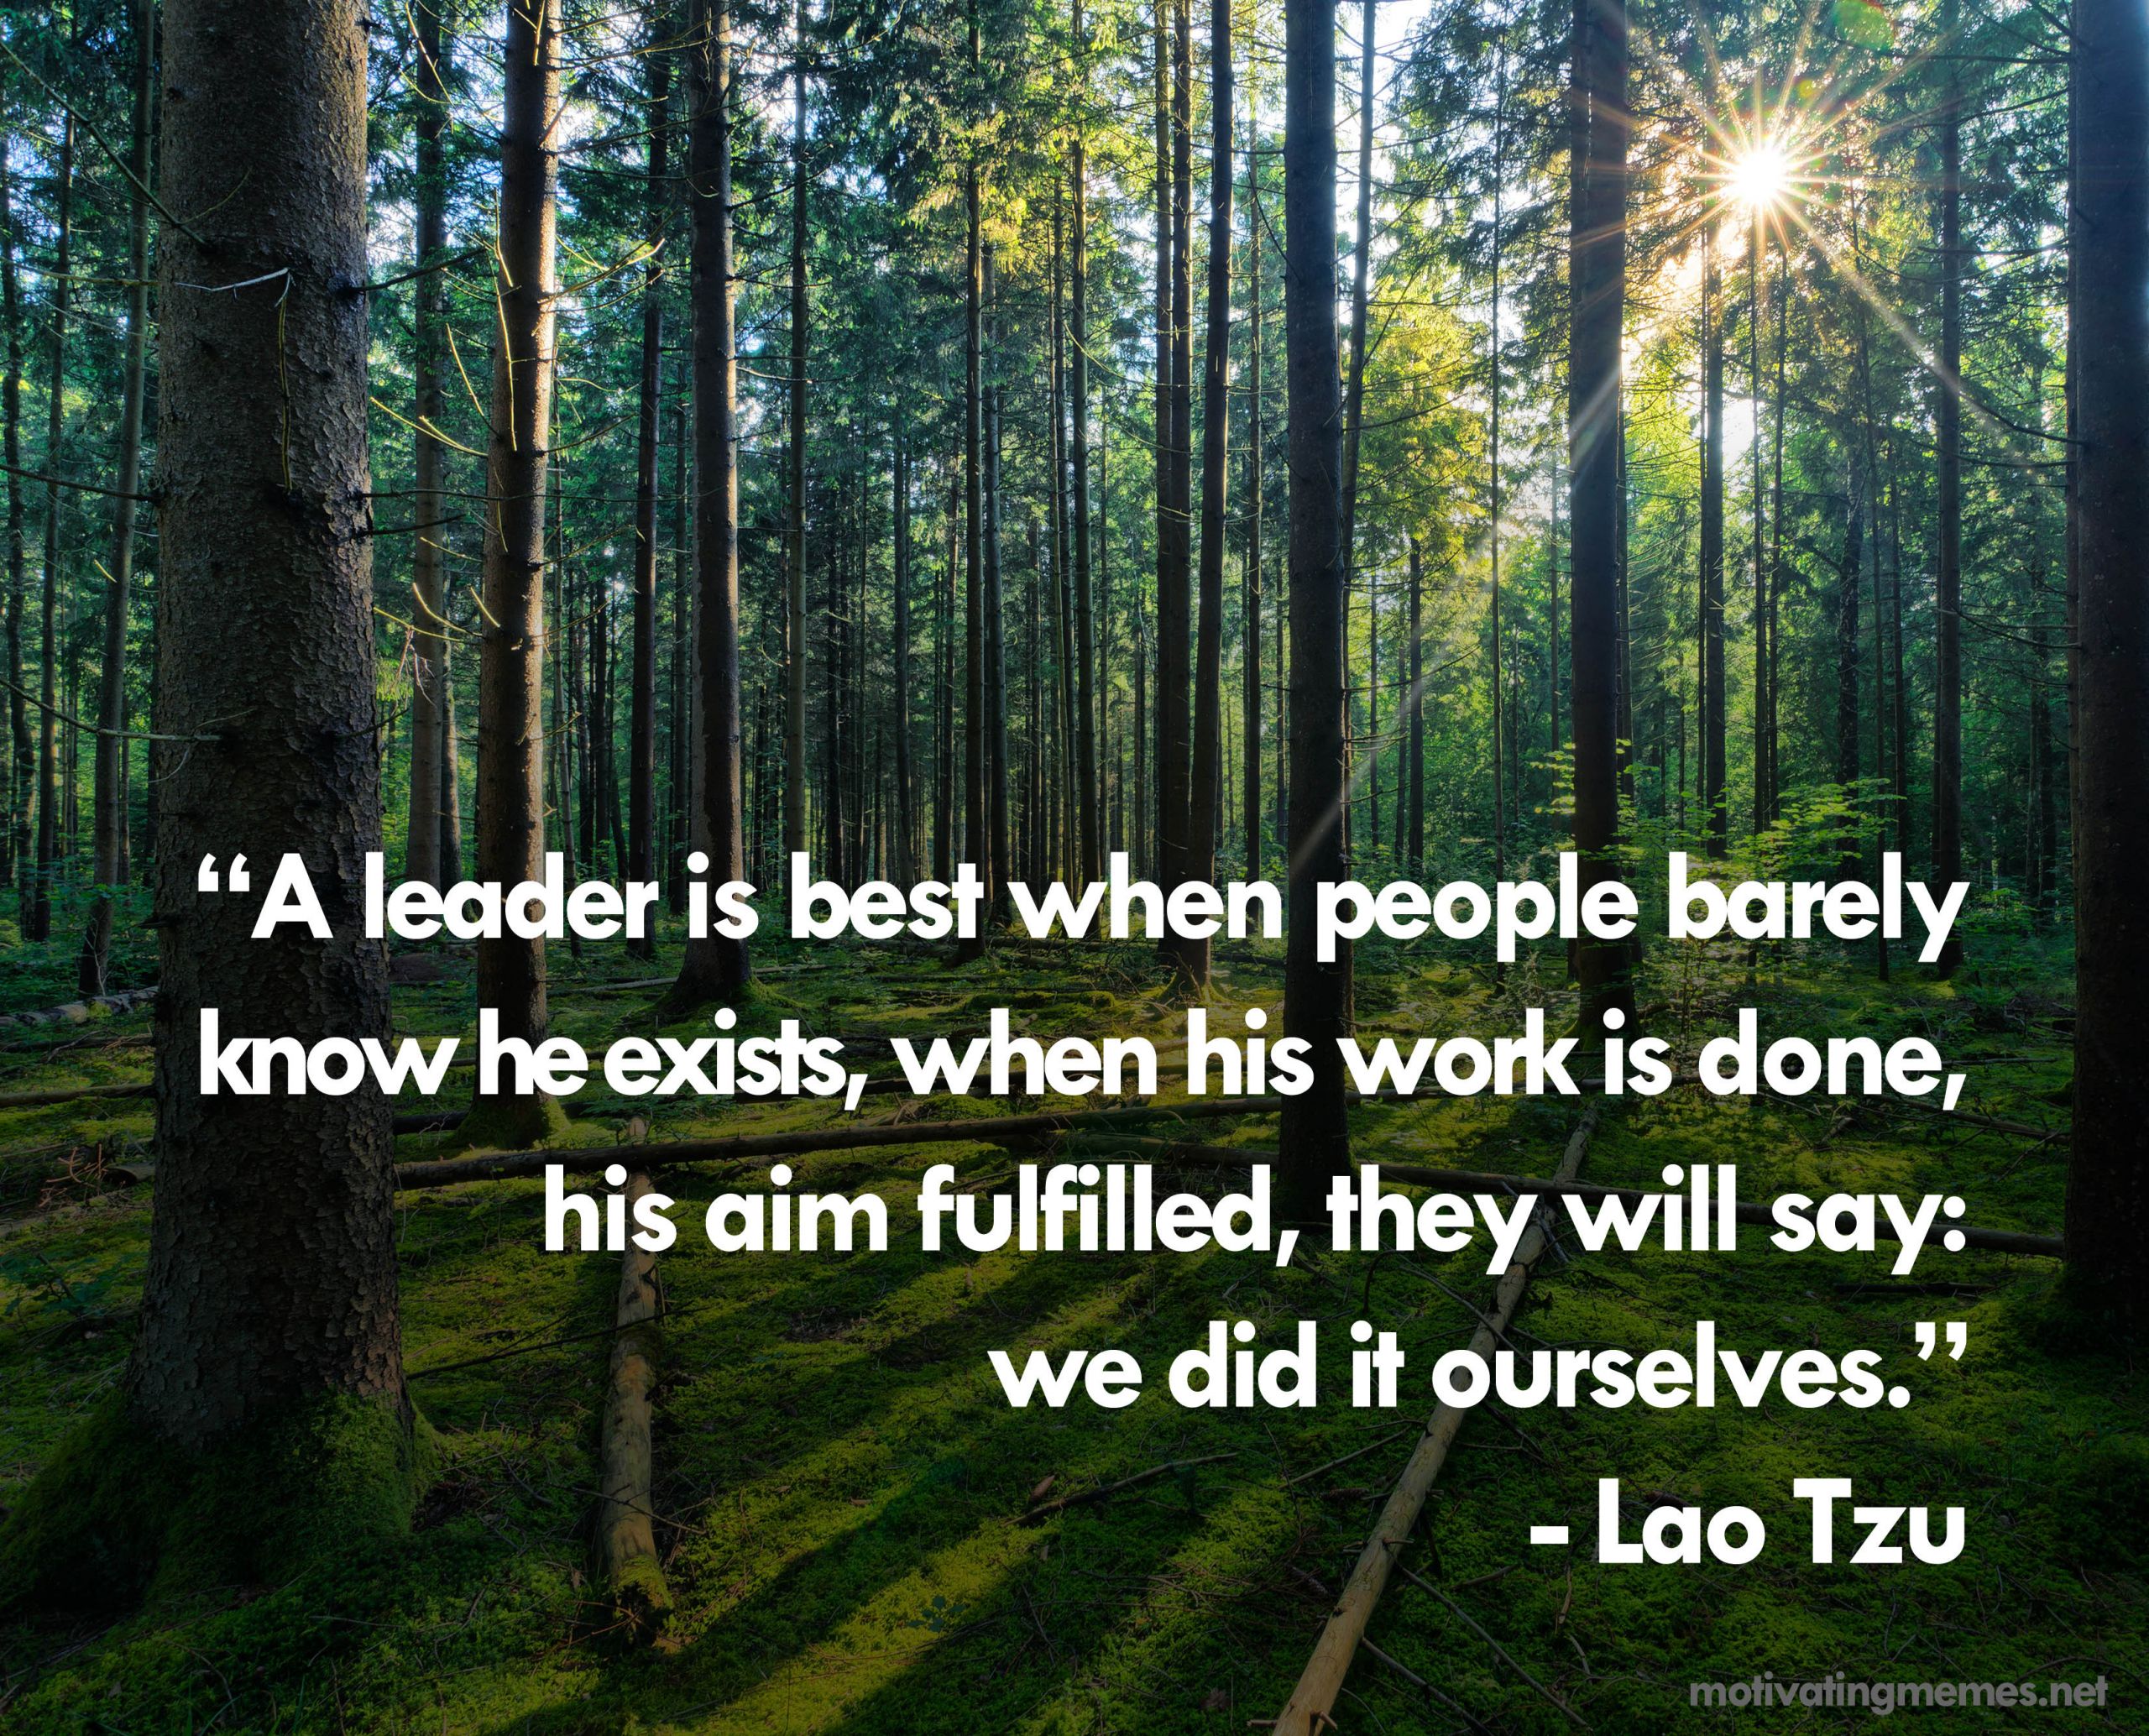 Lao Tzu Quotes Leadership
 4 Ways To Be e a Better Leader – The Philosophy of